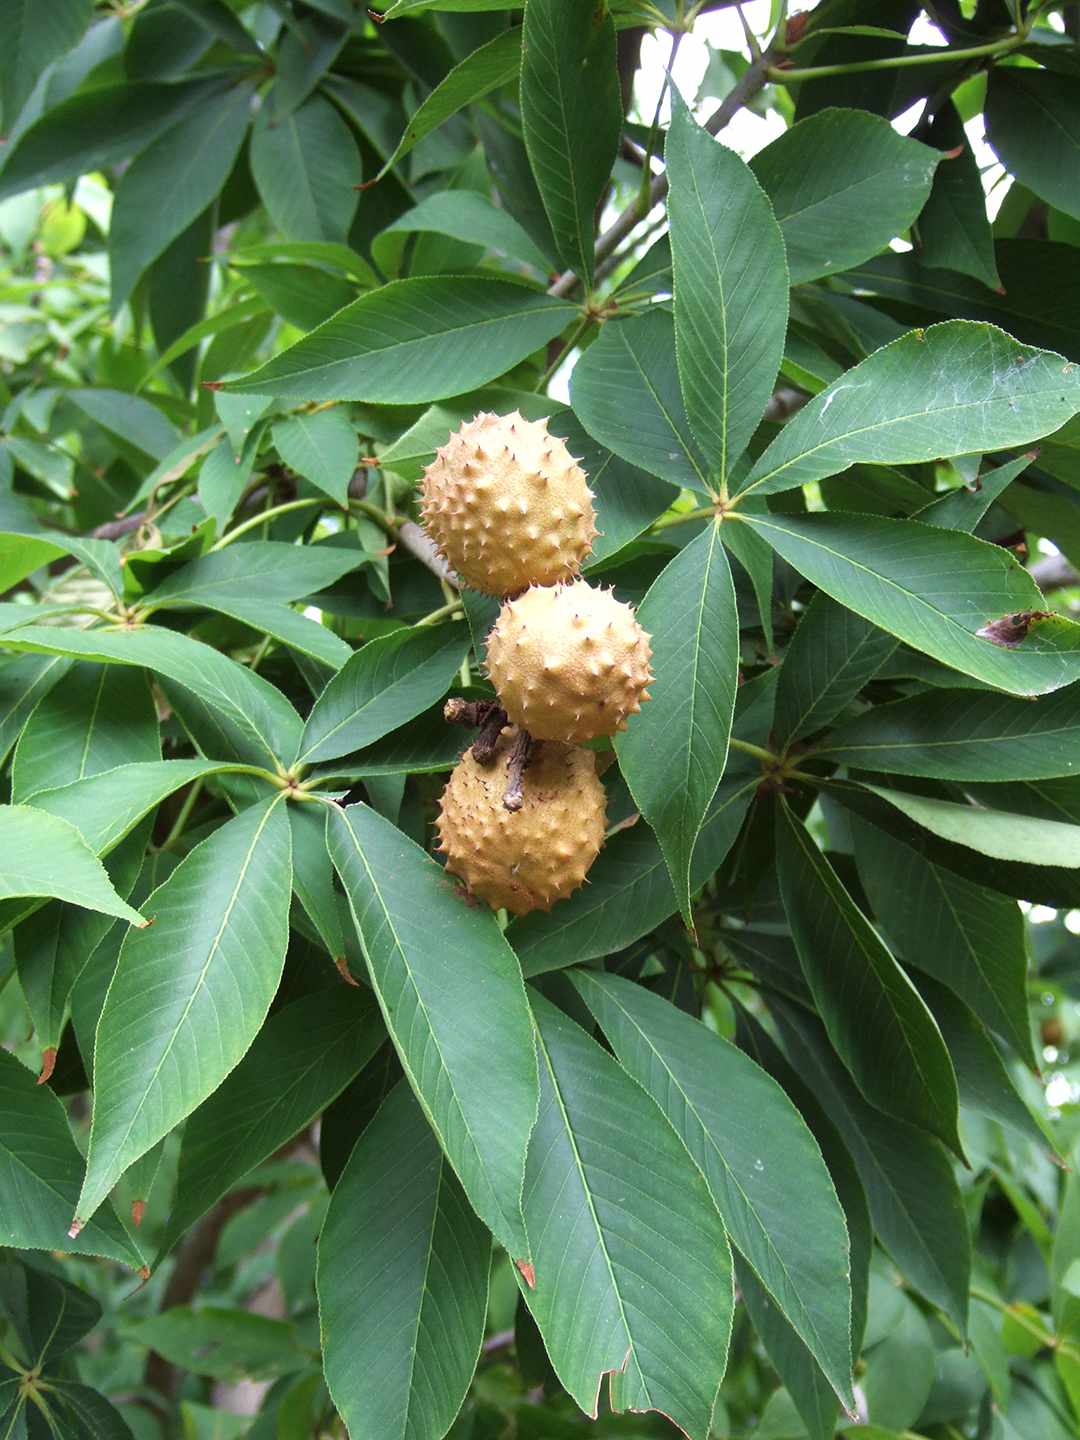 yellow spiked seed pods growing on branches with leaves